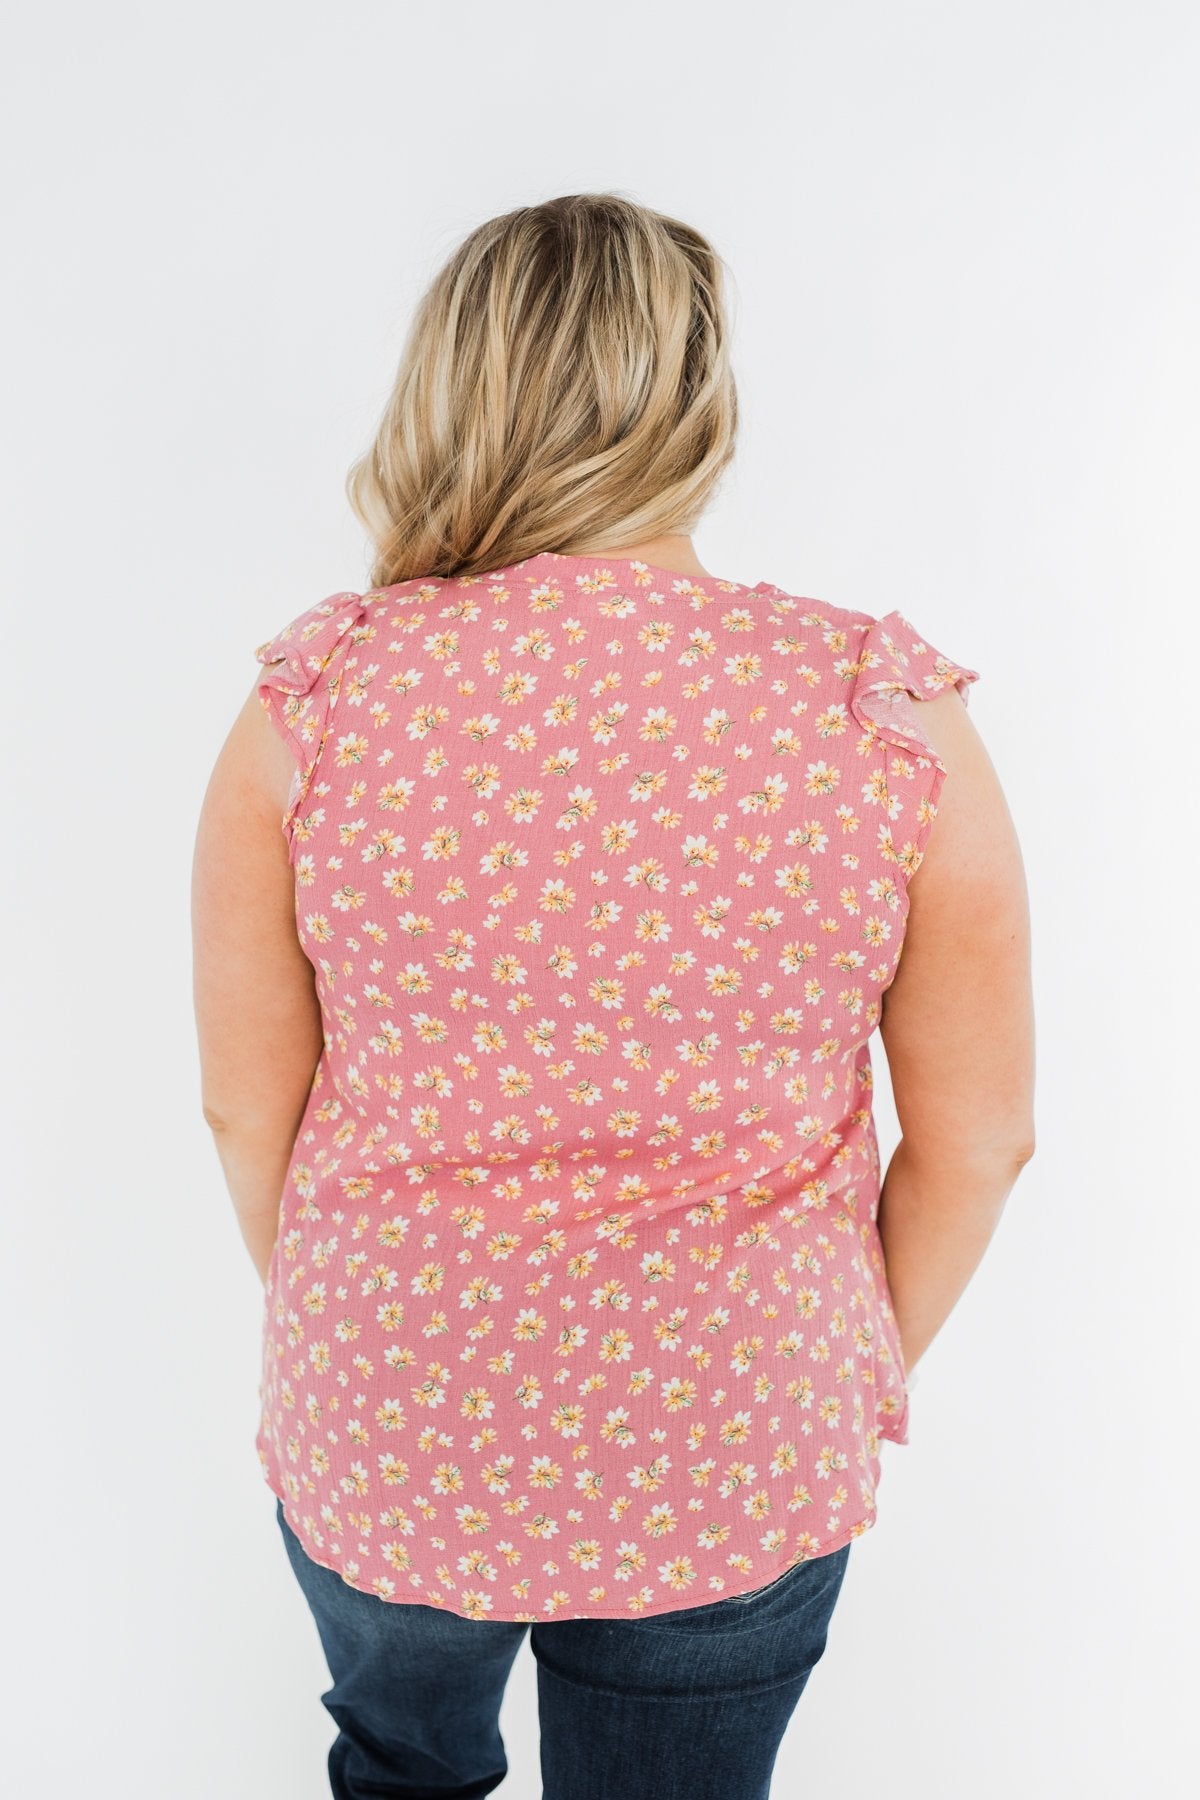 Every Now & Then Floral Tie Top- Pink